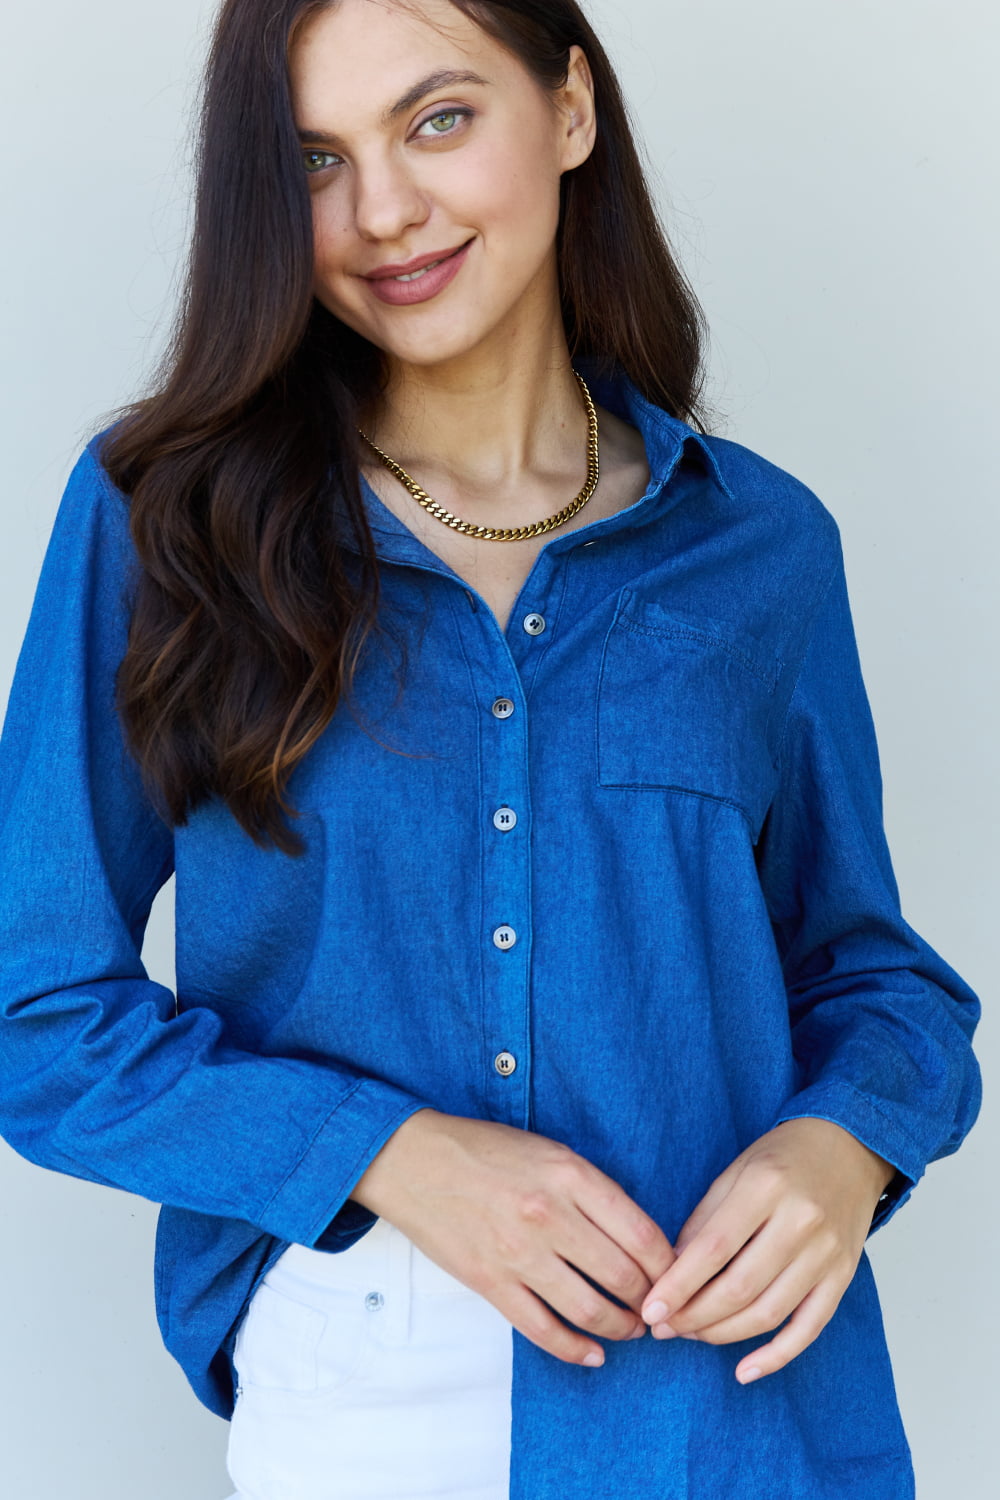 Doublju Blue Jean Baby Denim Button Down Shirt Top in Dark Blue Print on any thing USA/STOD clothes